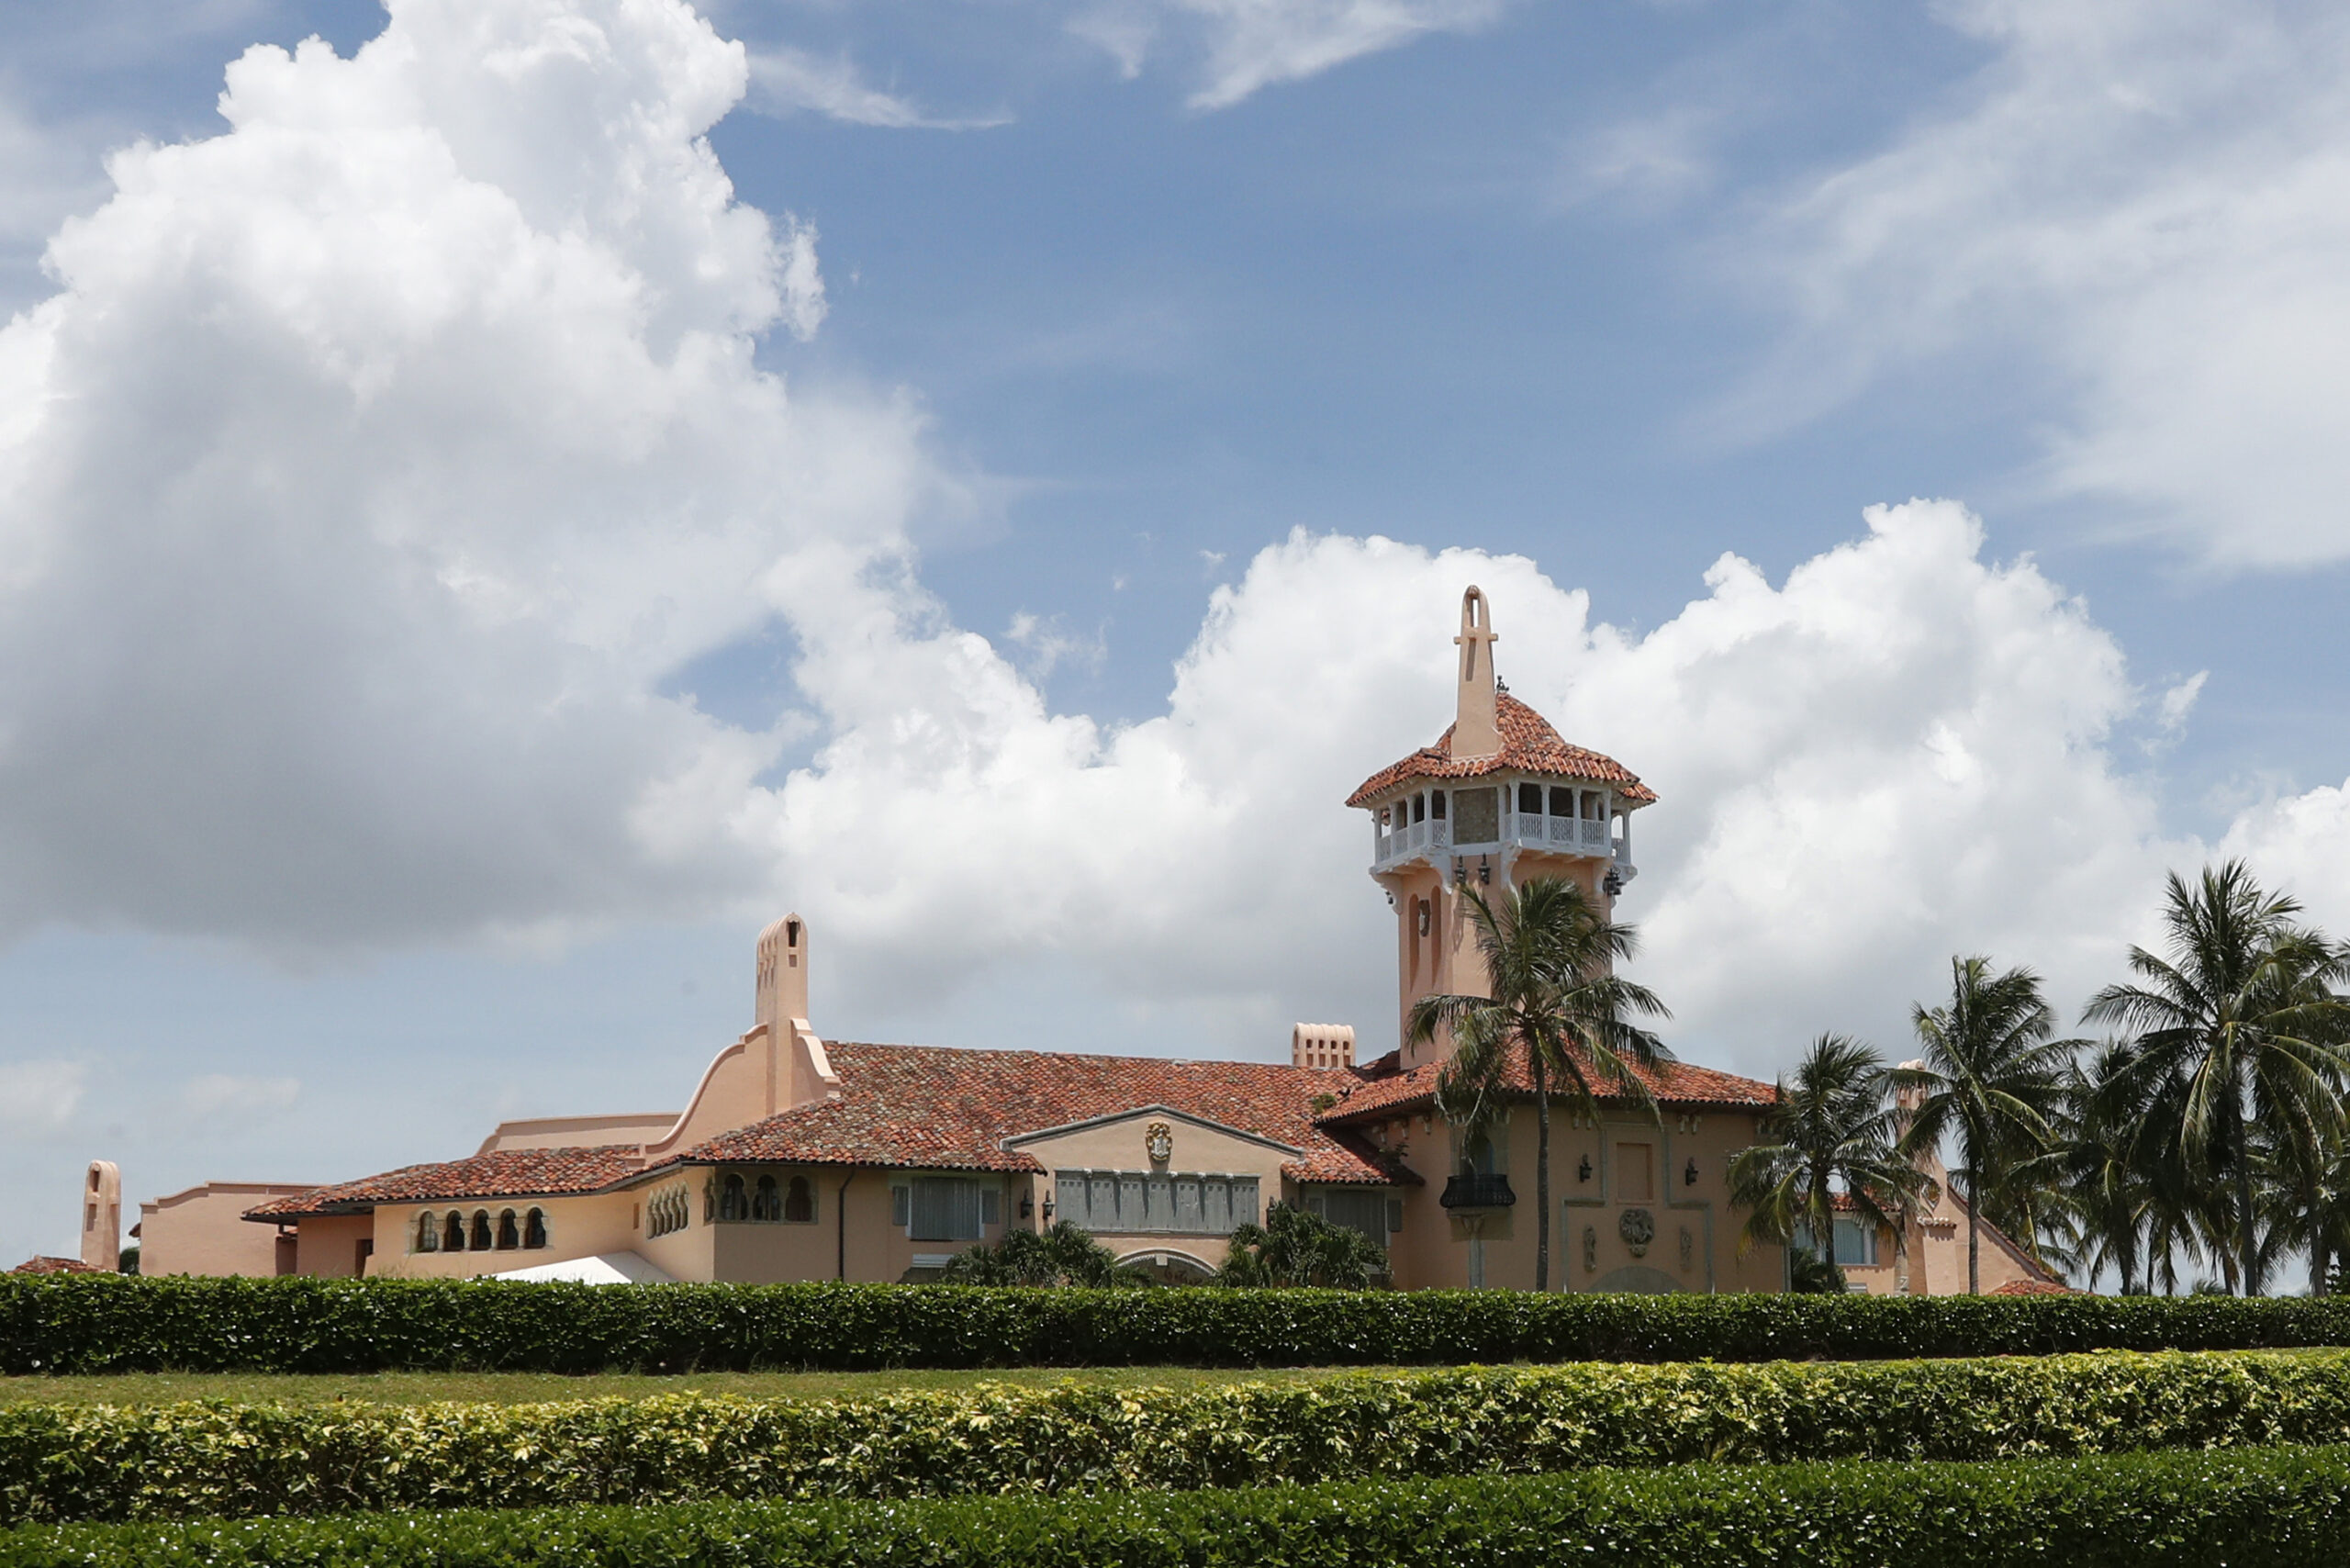 Wisconsin GOP politicians press FBI, Justice Department on Mar-a-Lago search for Trump documents